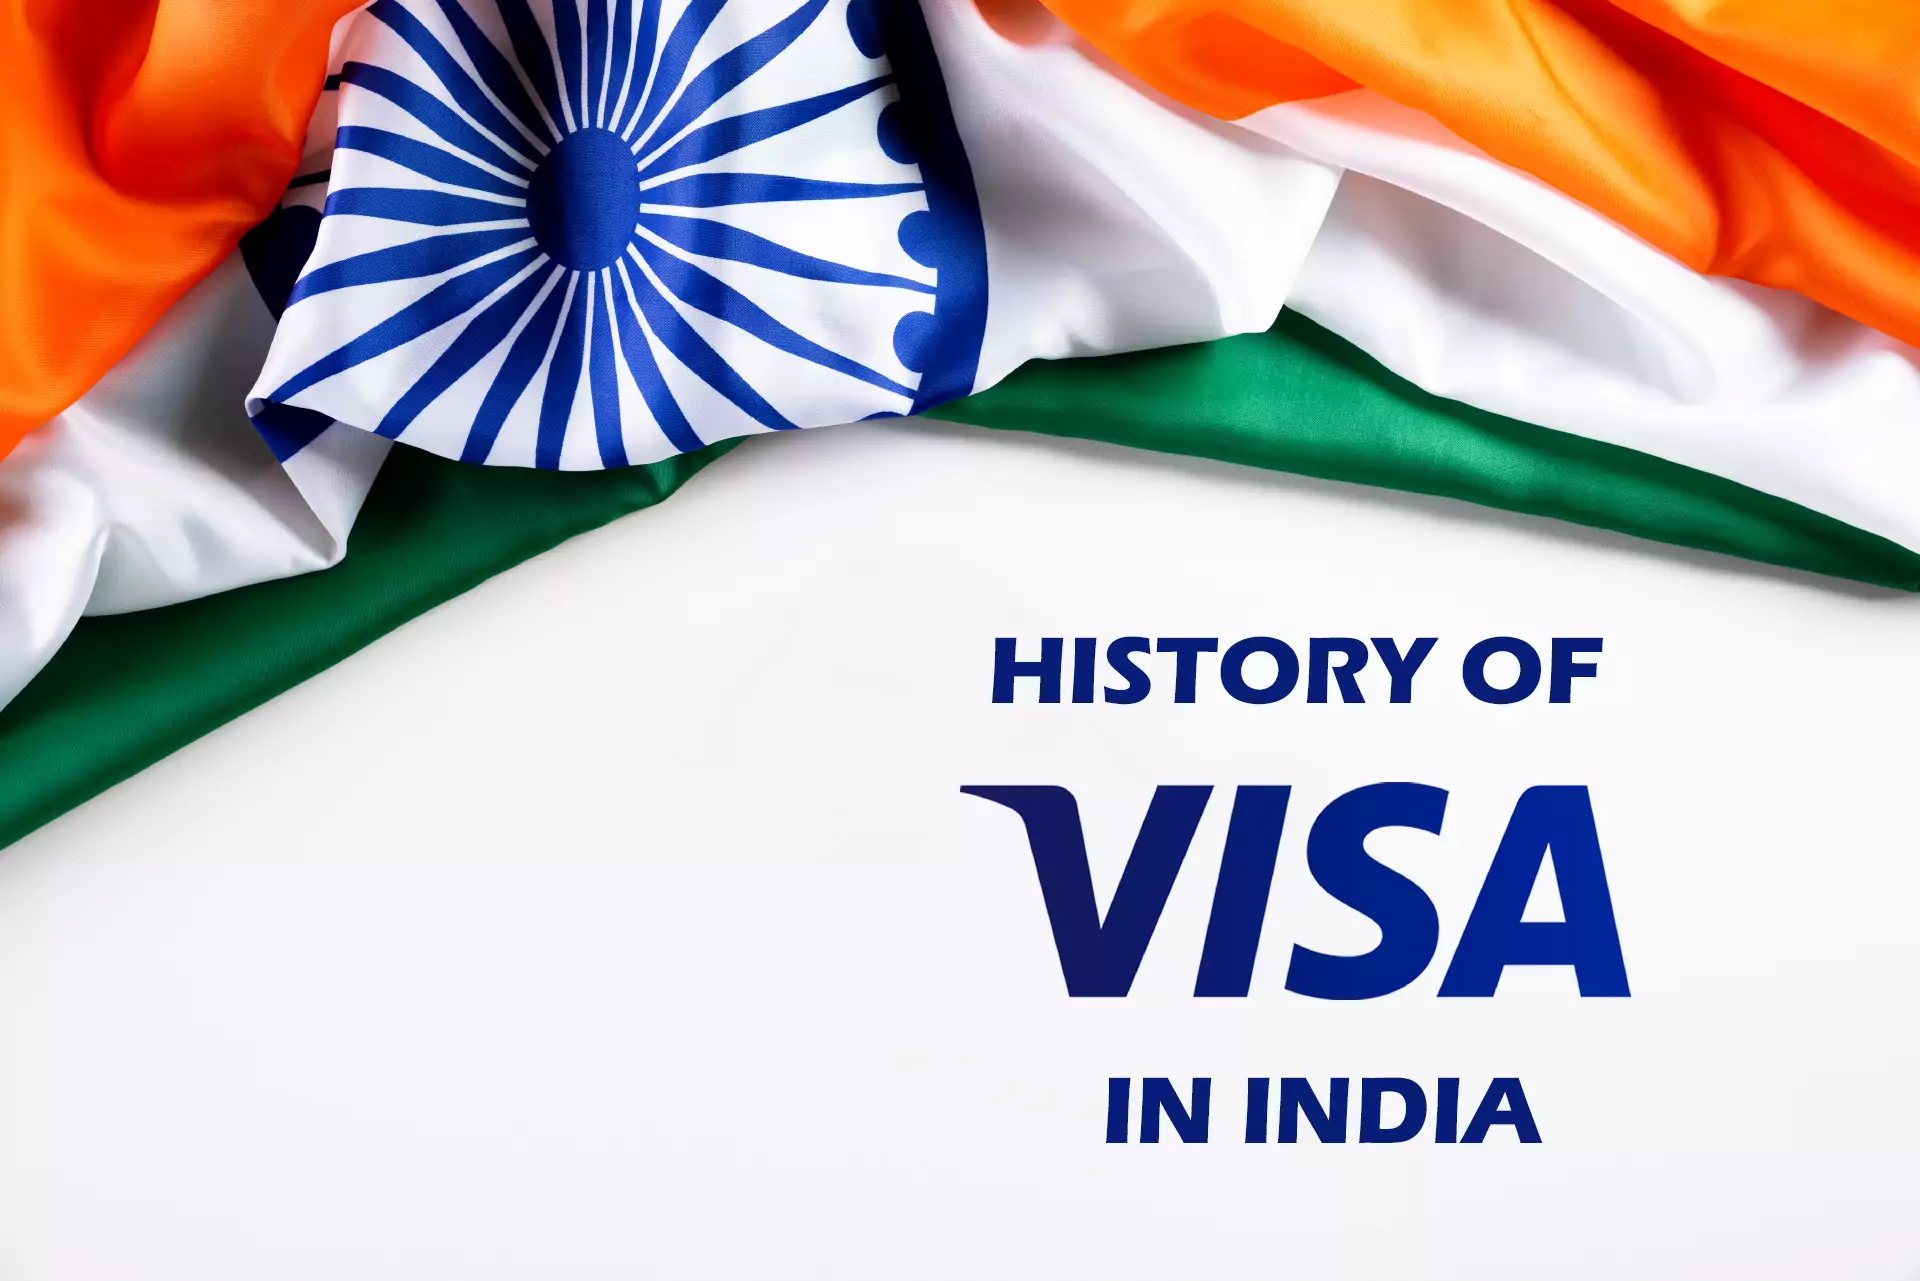 Every year Visa attracts more and more new users from India.